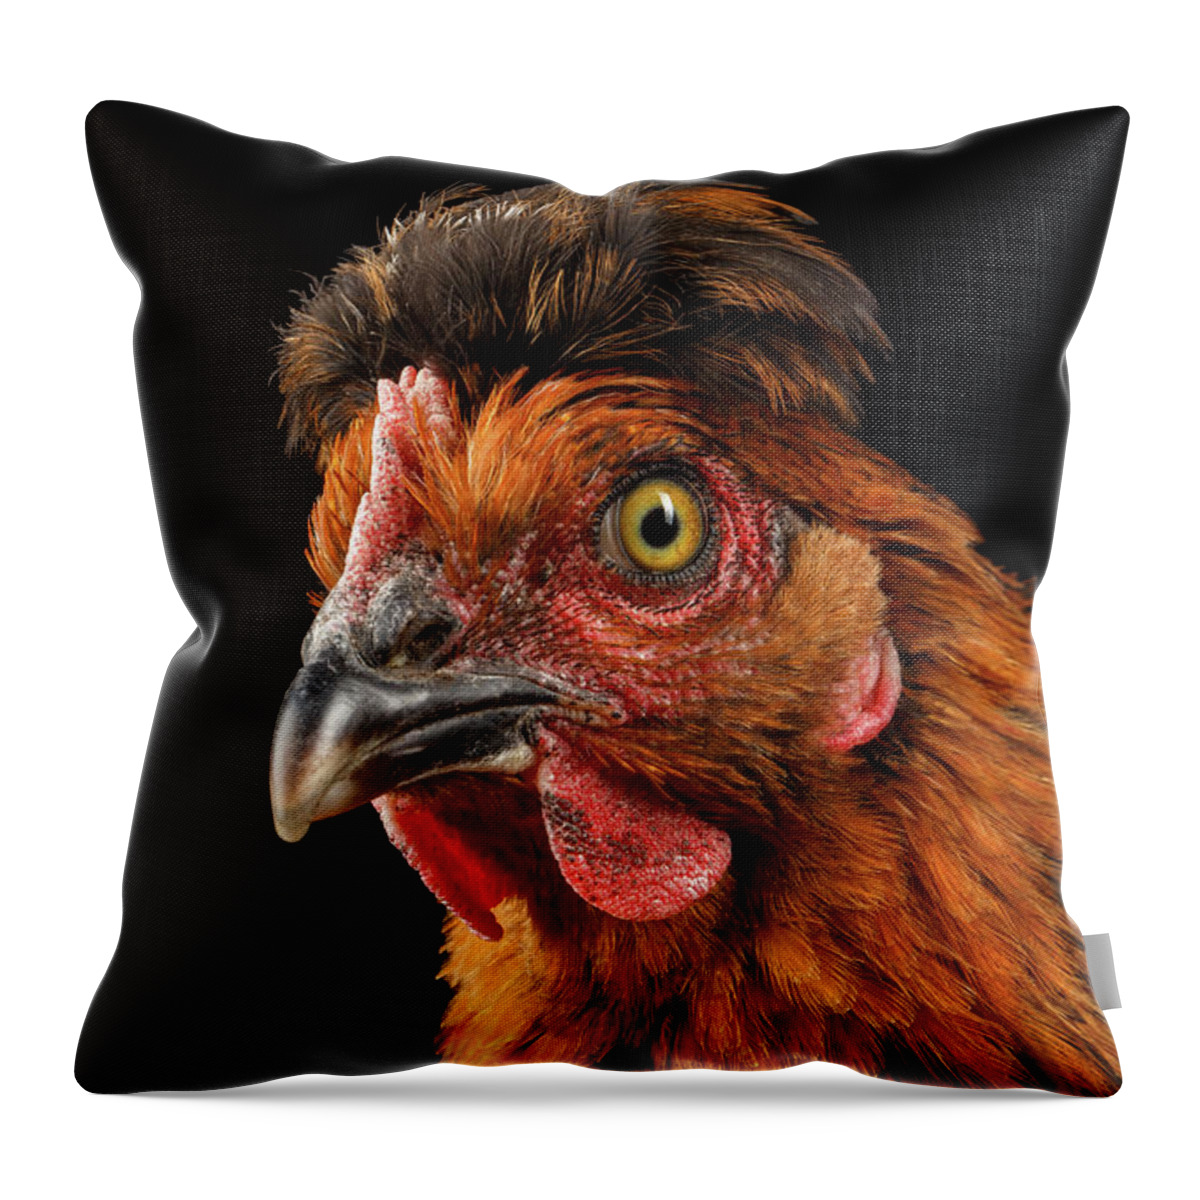 Chicken Throw Pillow featuring the photograph Closeup Ginger Chicken Isolated on Black Background in Profile view by Sergey Taran